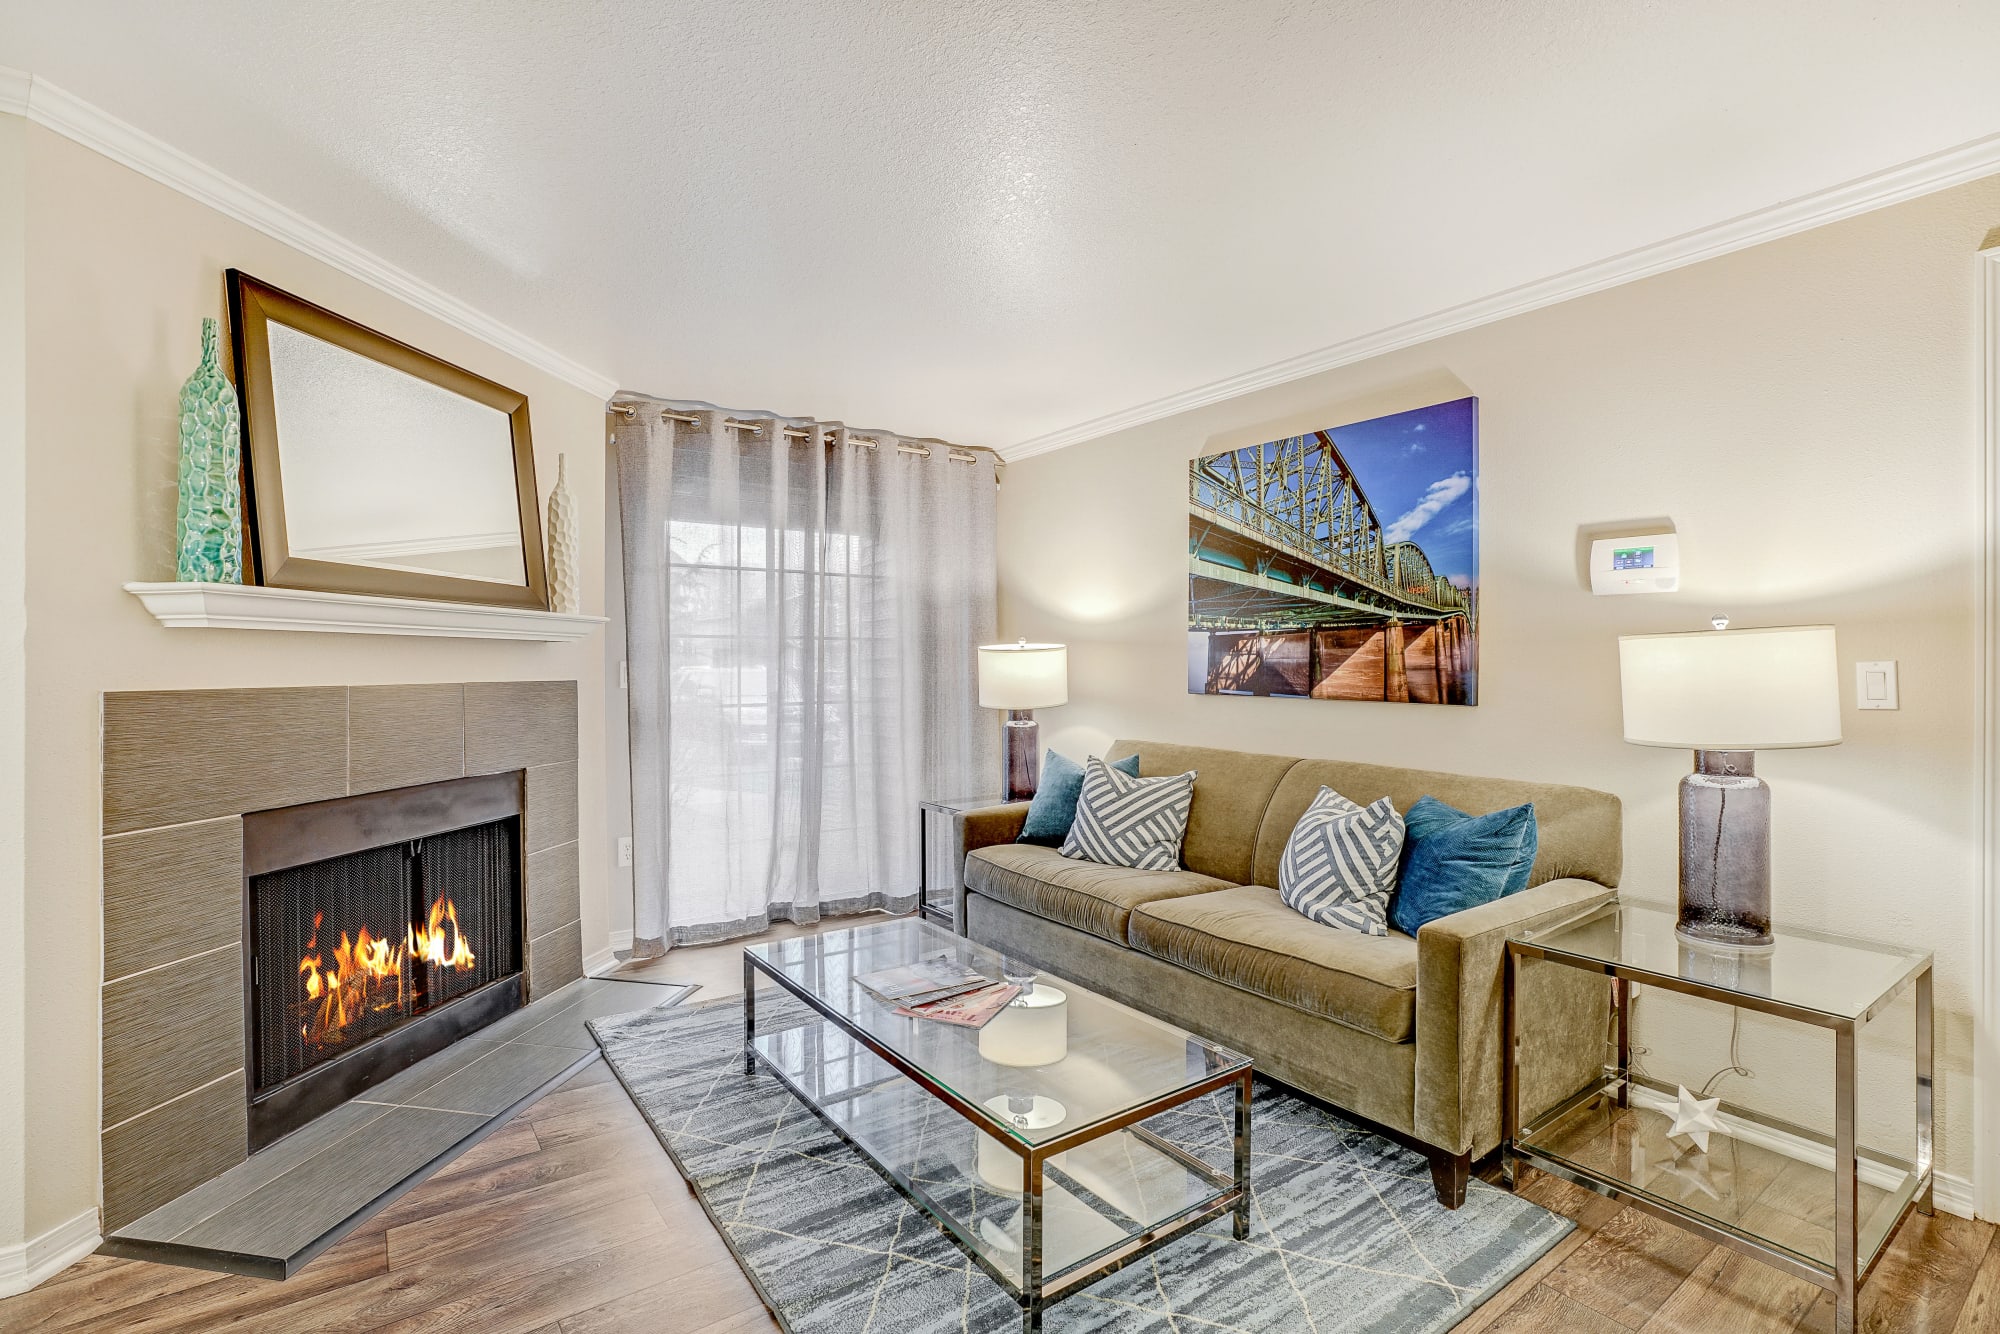 Living room with a fireplace at Walnut Grove Landing Apartments in Vancouver, Washington